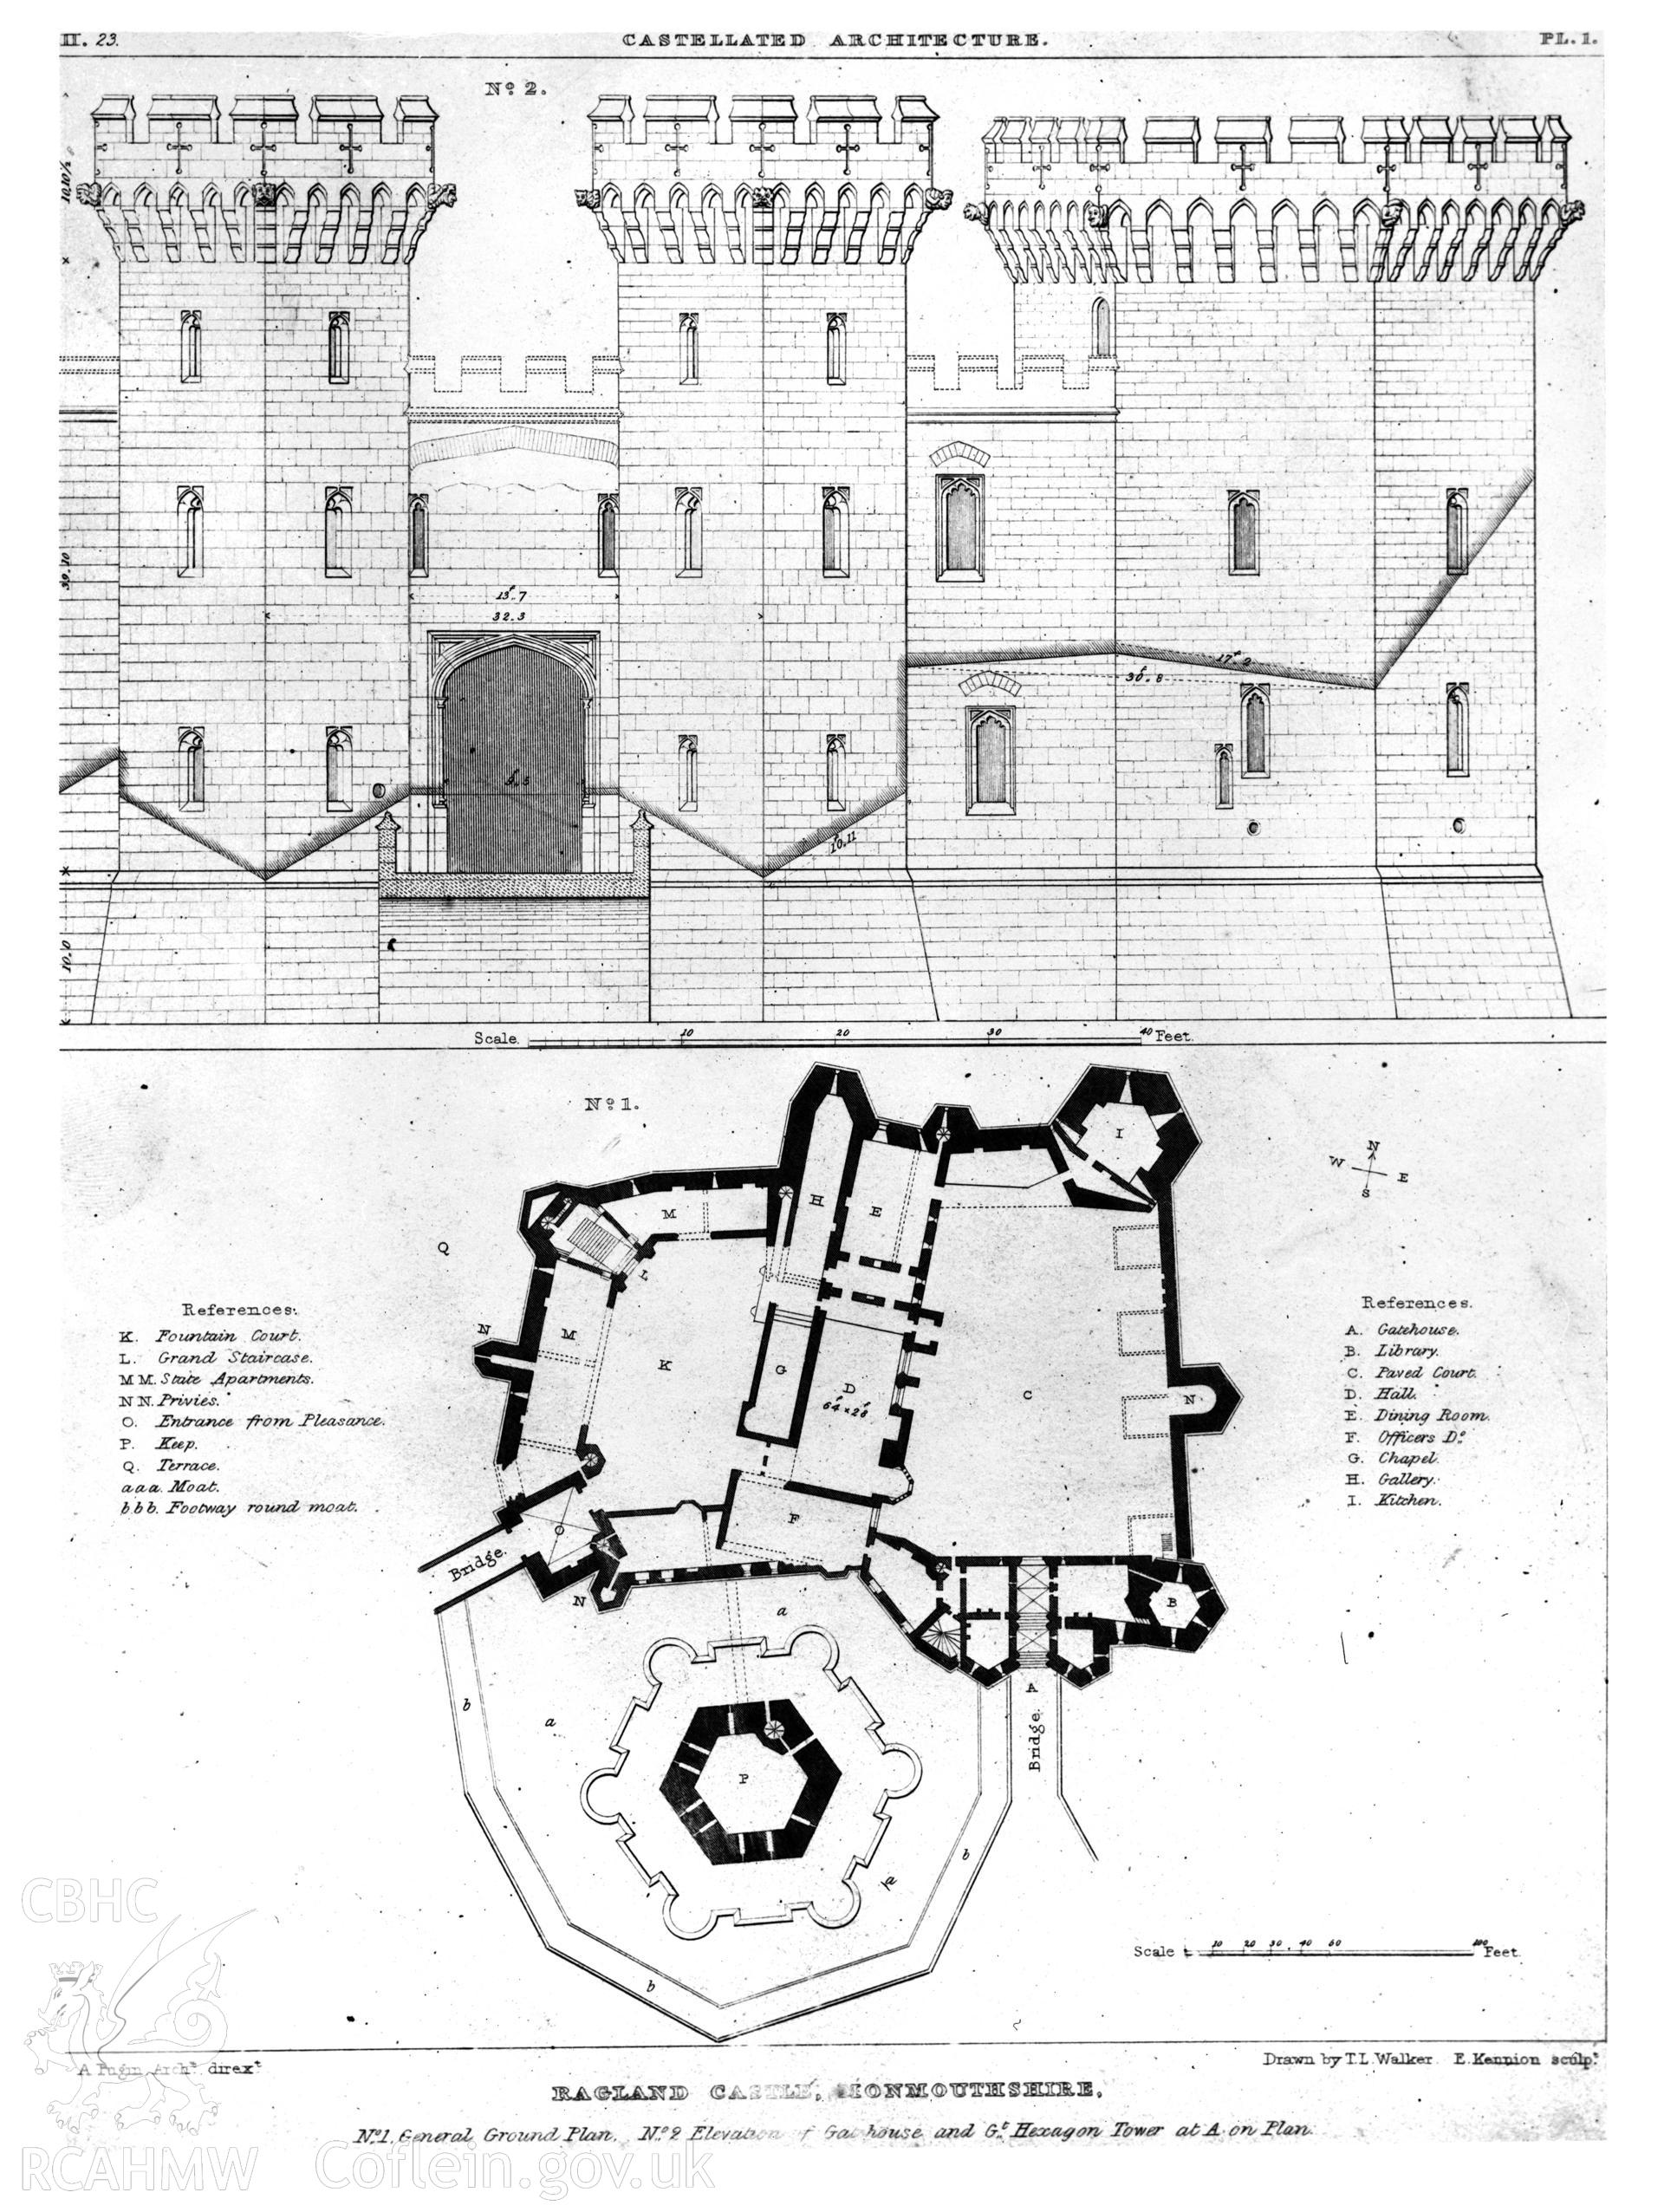 Photographic copy of measured drawing showing plan and elevation of the gatehouse.